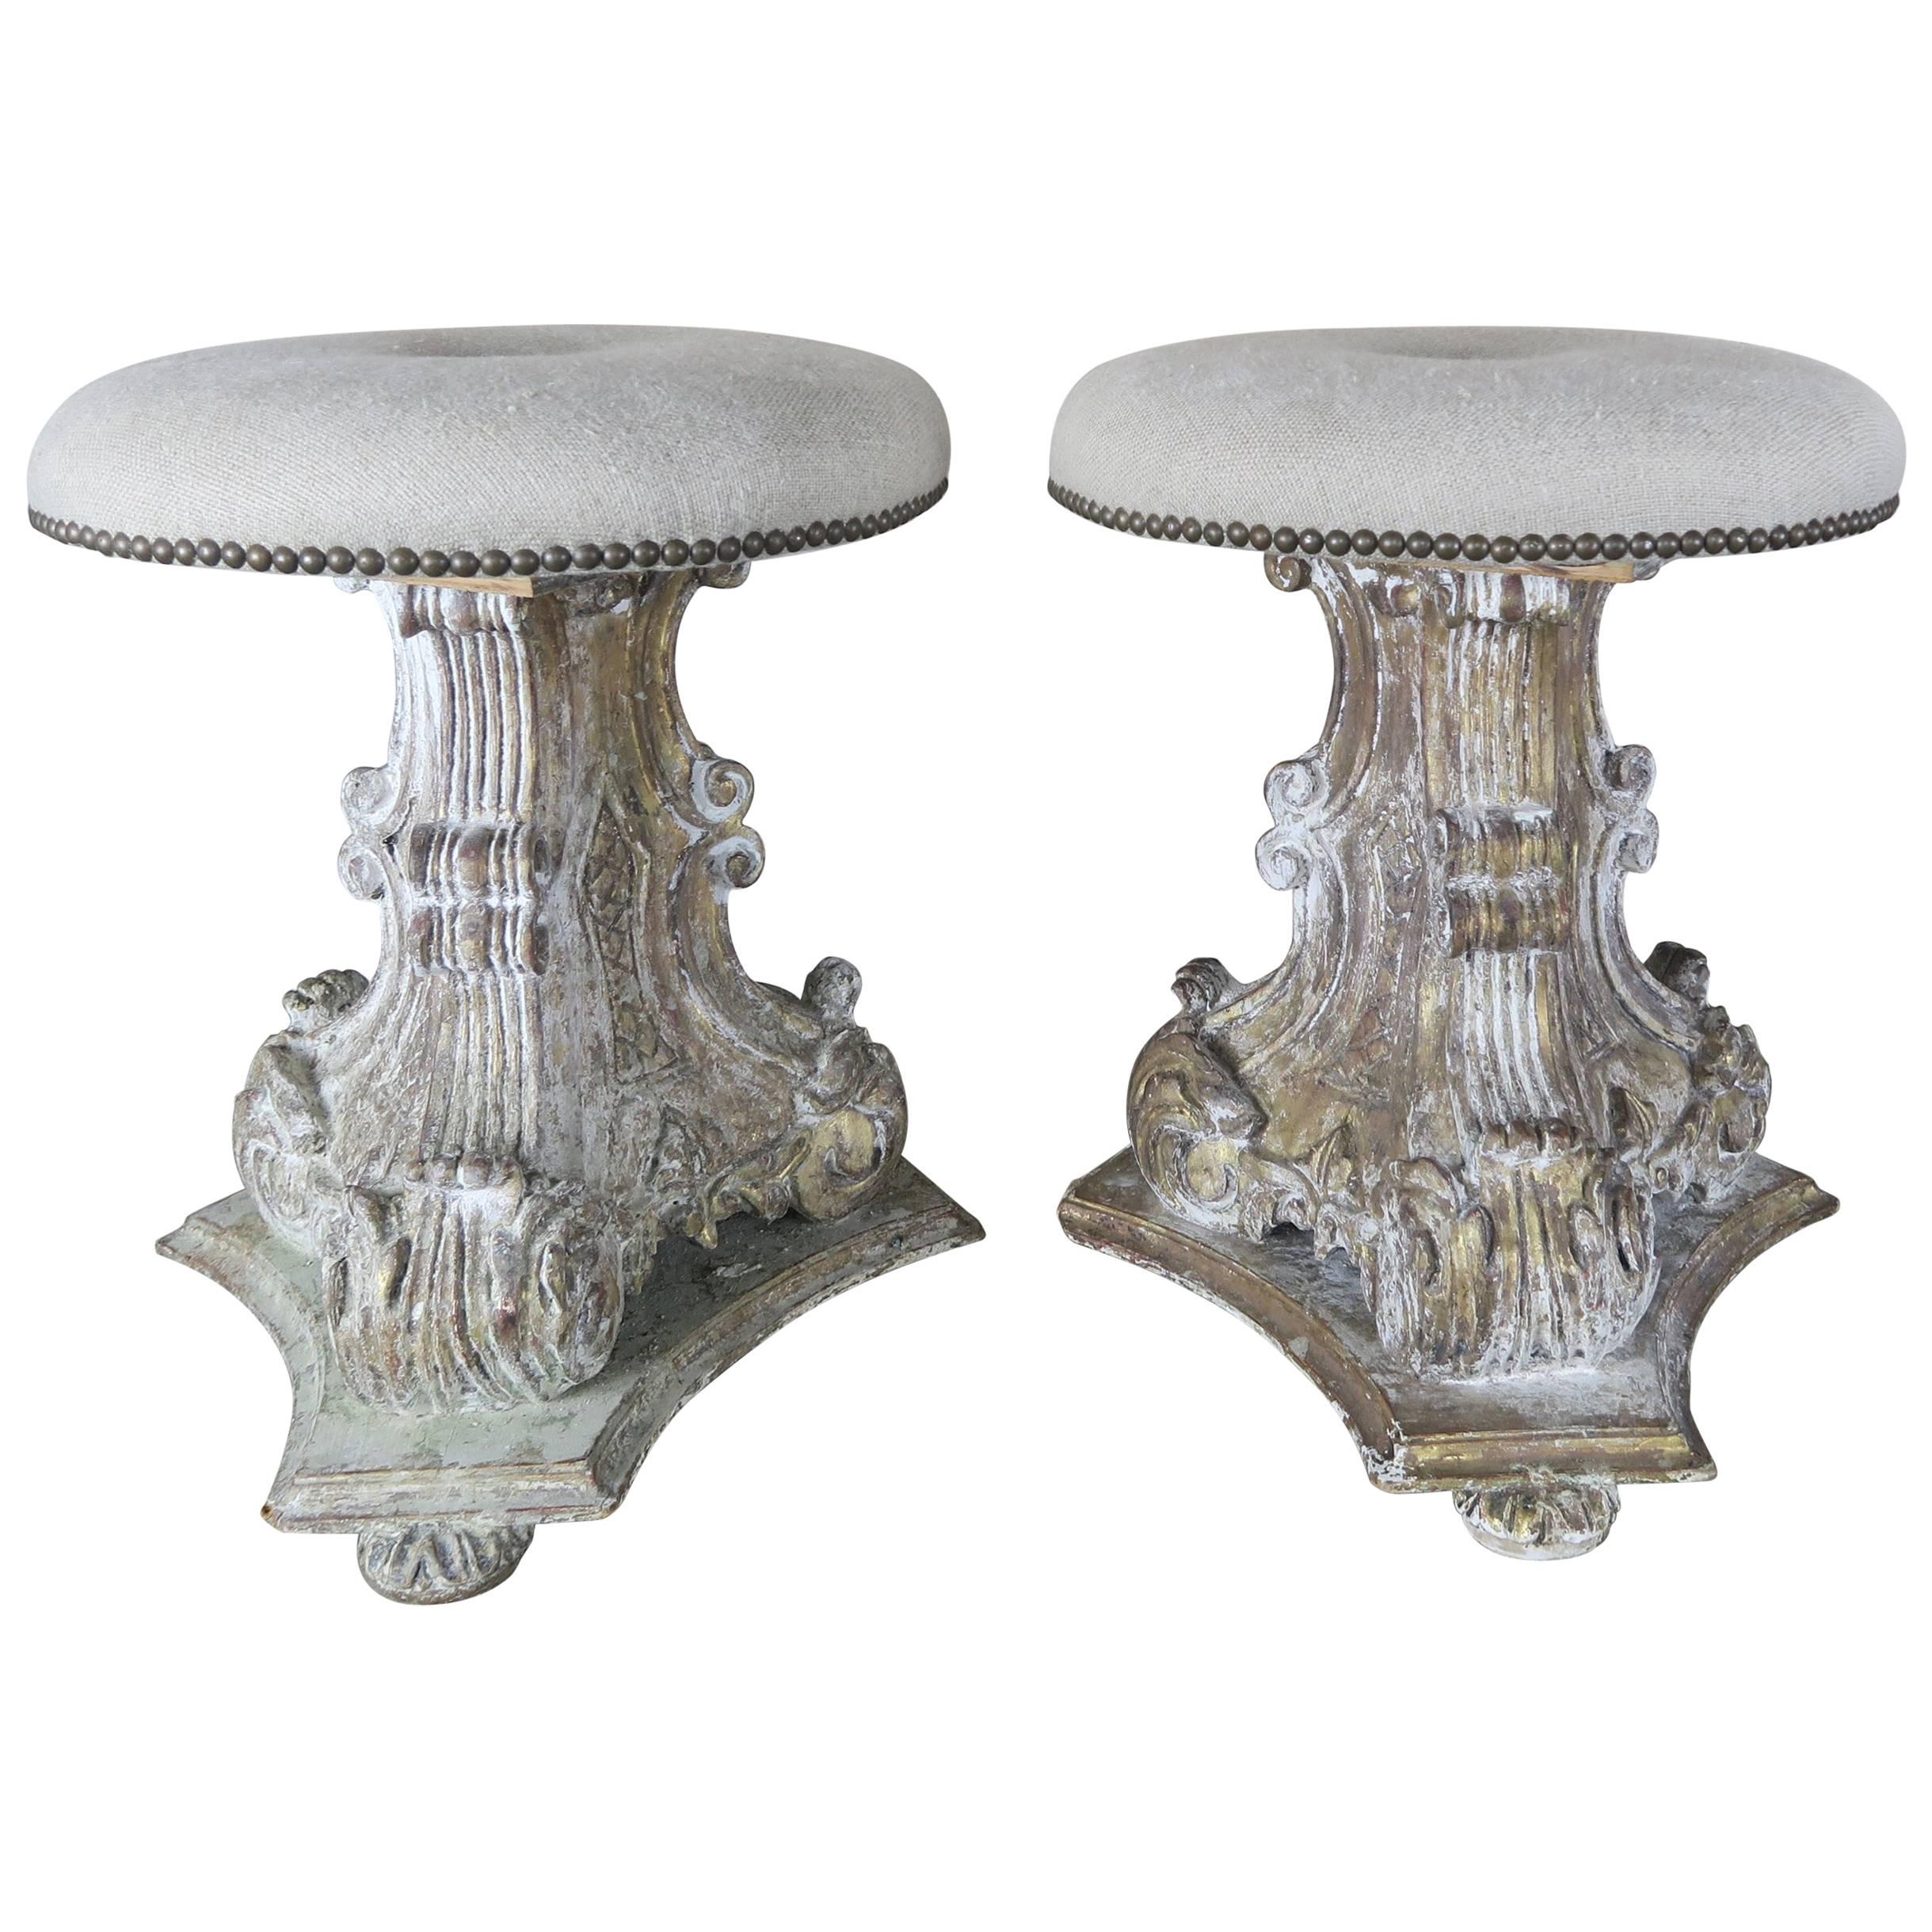 Pair of Italian Painted and Parcel-Gilt Carved Stools